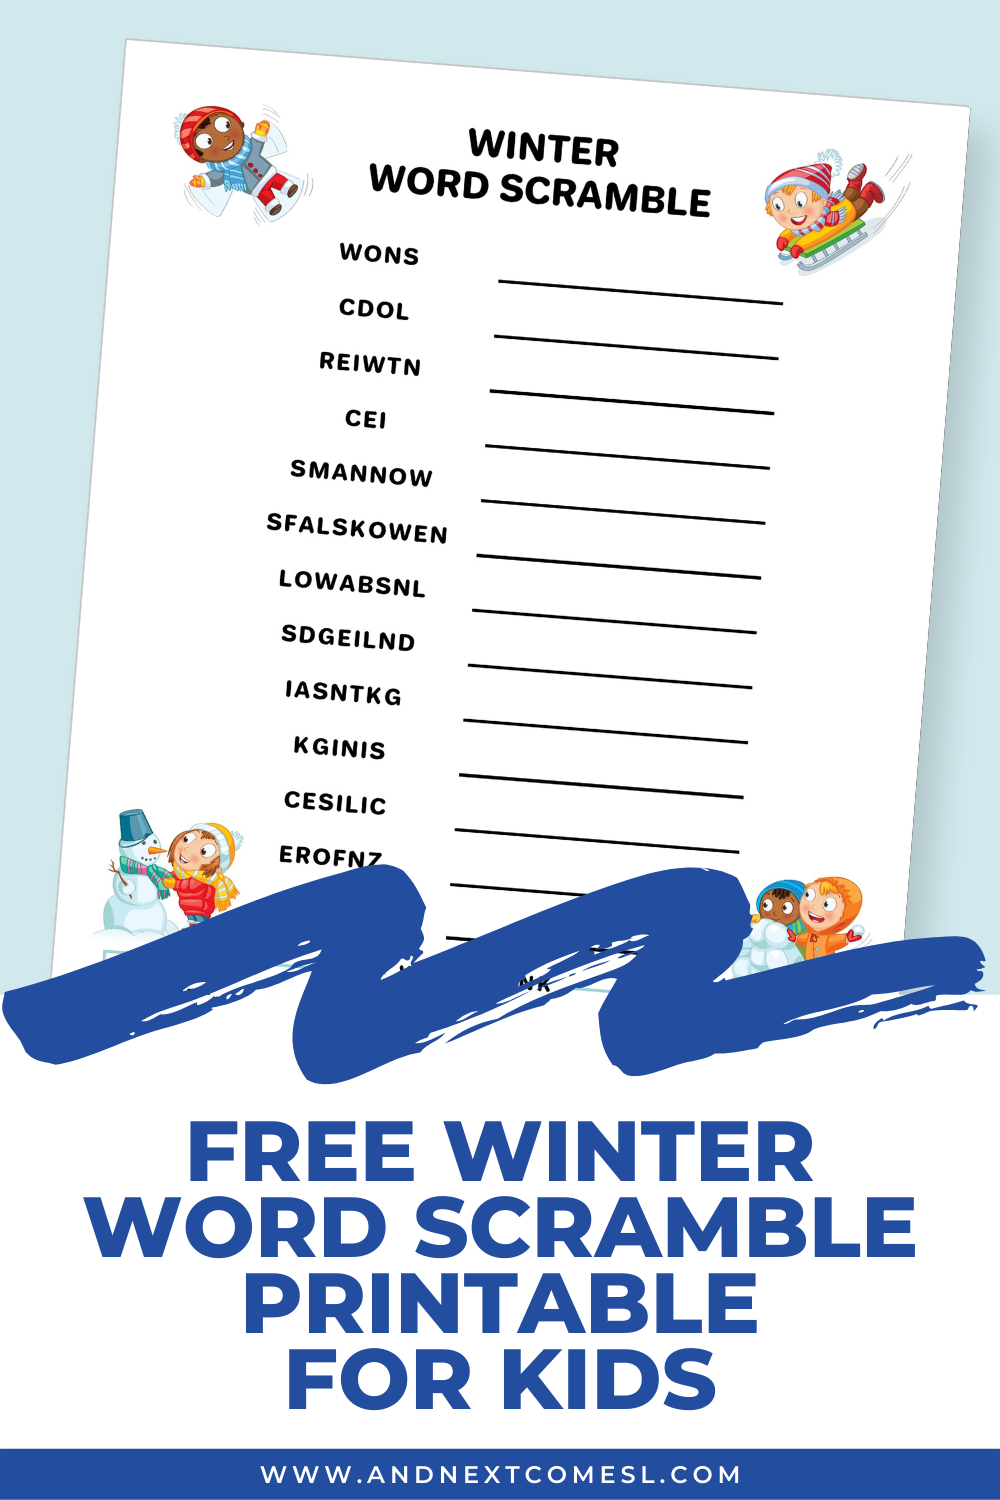 free-winter-word-scramble-printable-for-kids-and-next-comes-l